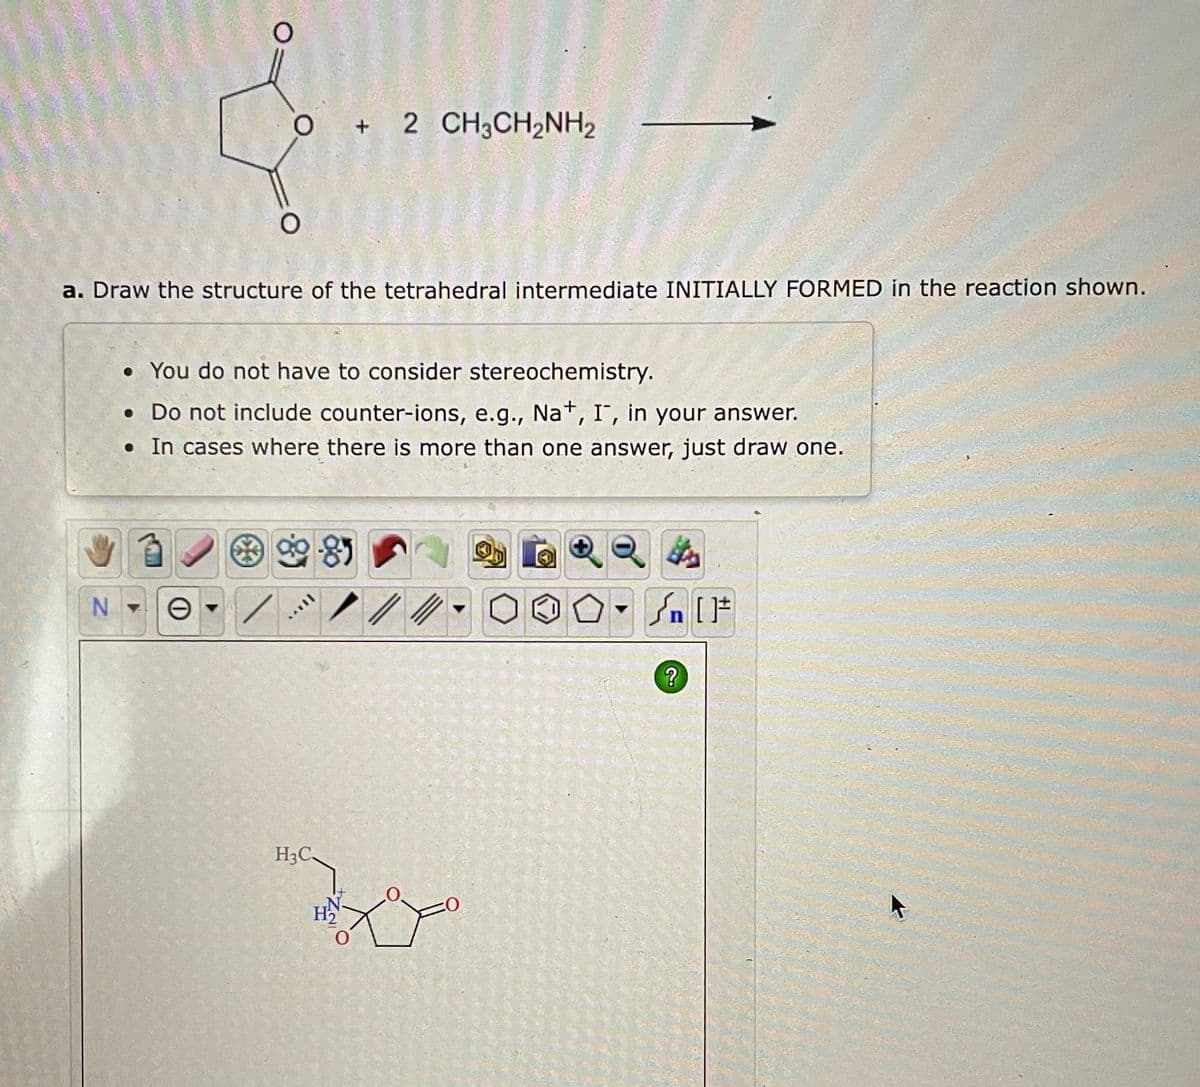 O
O
NO
a. Draw the structure of the tetrahedral intermediate INITIALLY FORMED in the reaction shown.
• You do not have to consider stereochemistry.
• Do not include counter-ions, e.g., Na+, I, in your answer.
. In cases where there is more than one answer, just draw one.
90-85
+ 2 CH3CH2NH2
H3C.
H₂
4
[ ] در
?